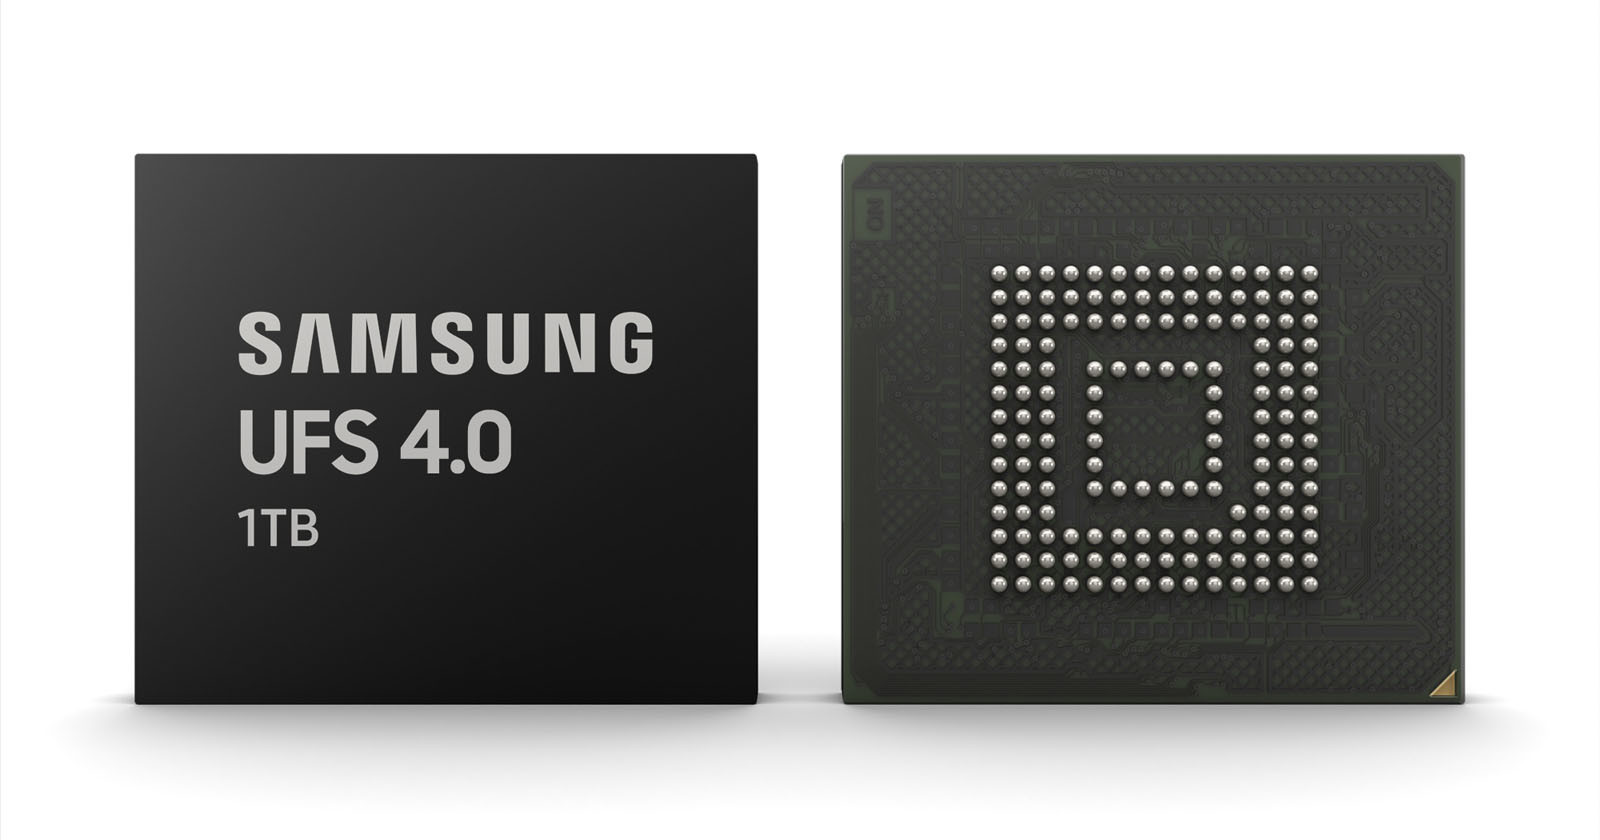 Samsungs New Flash Memory Writes Twice as Fast with Half the Power